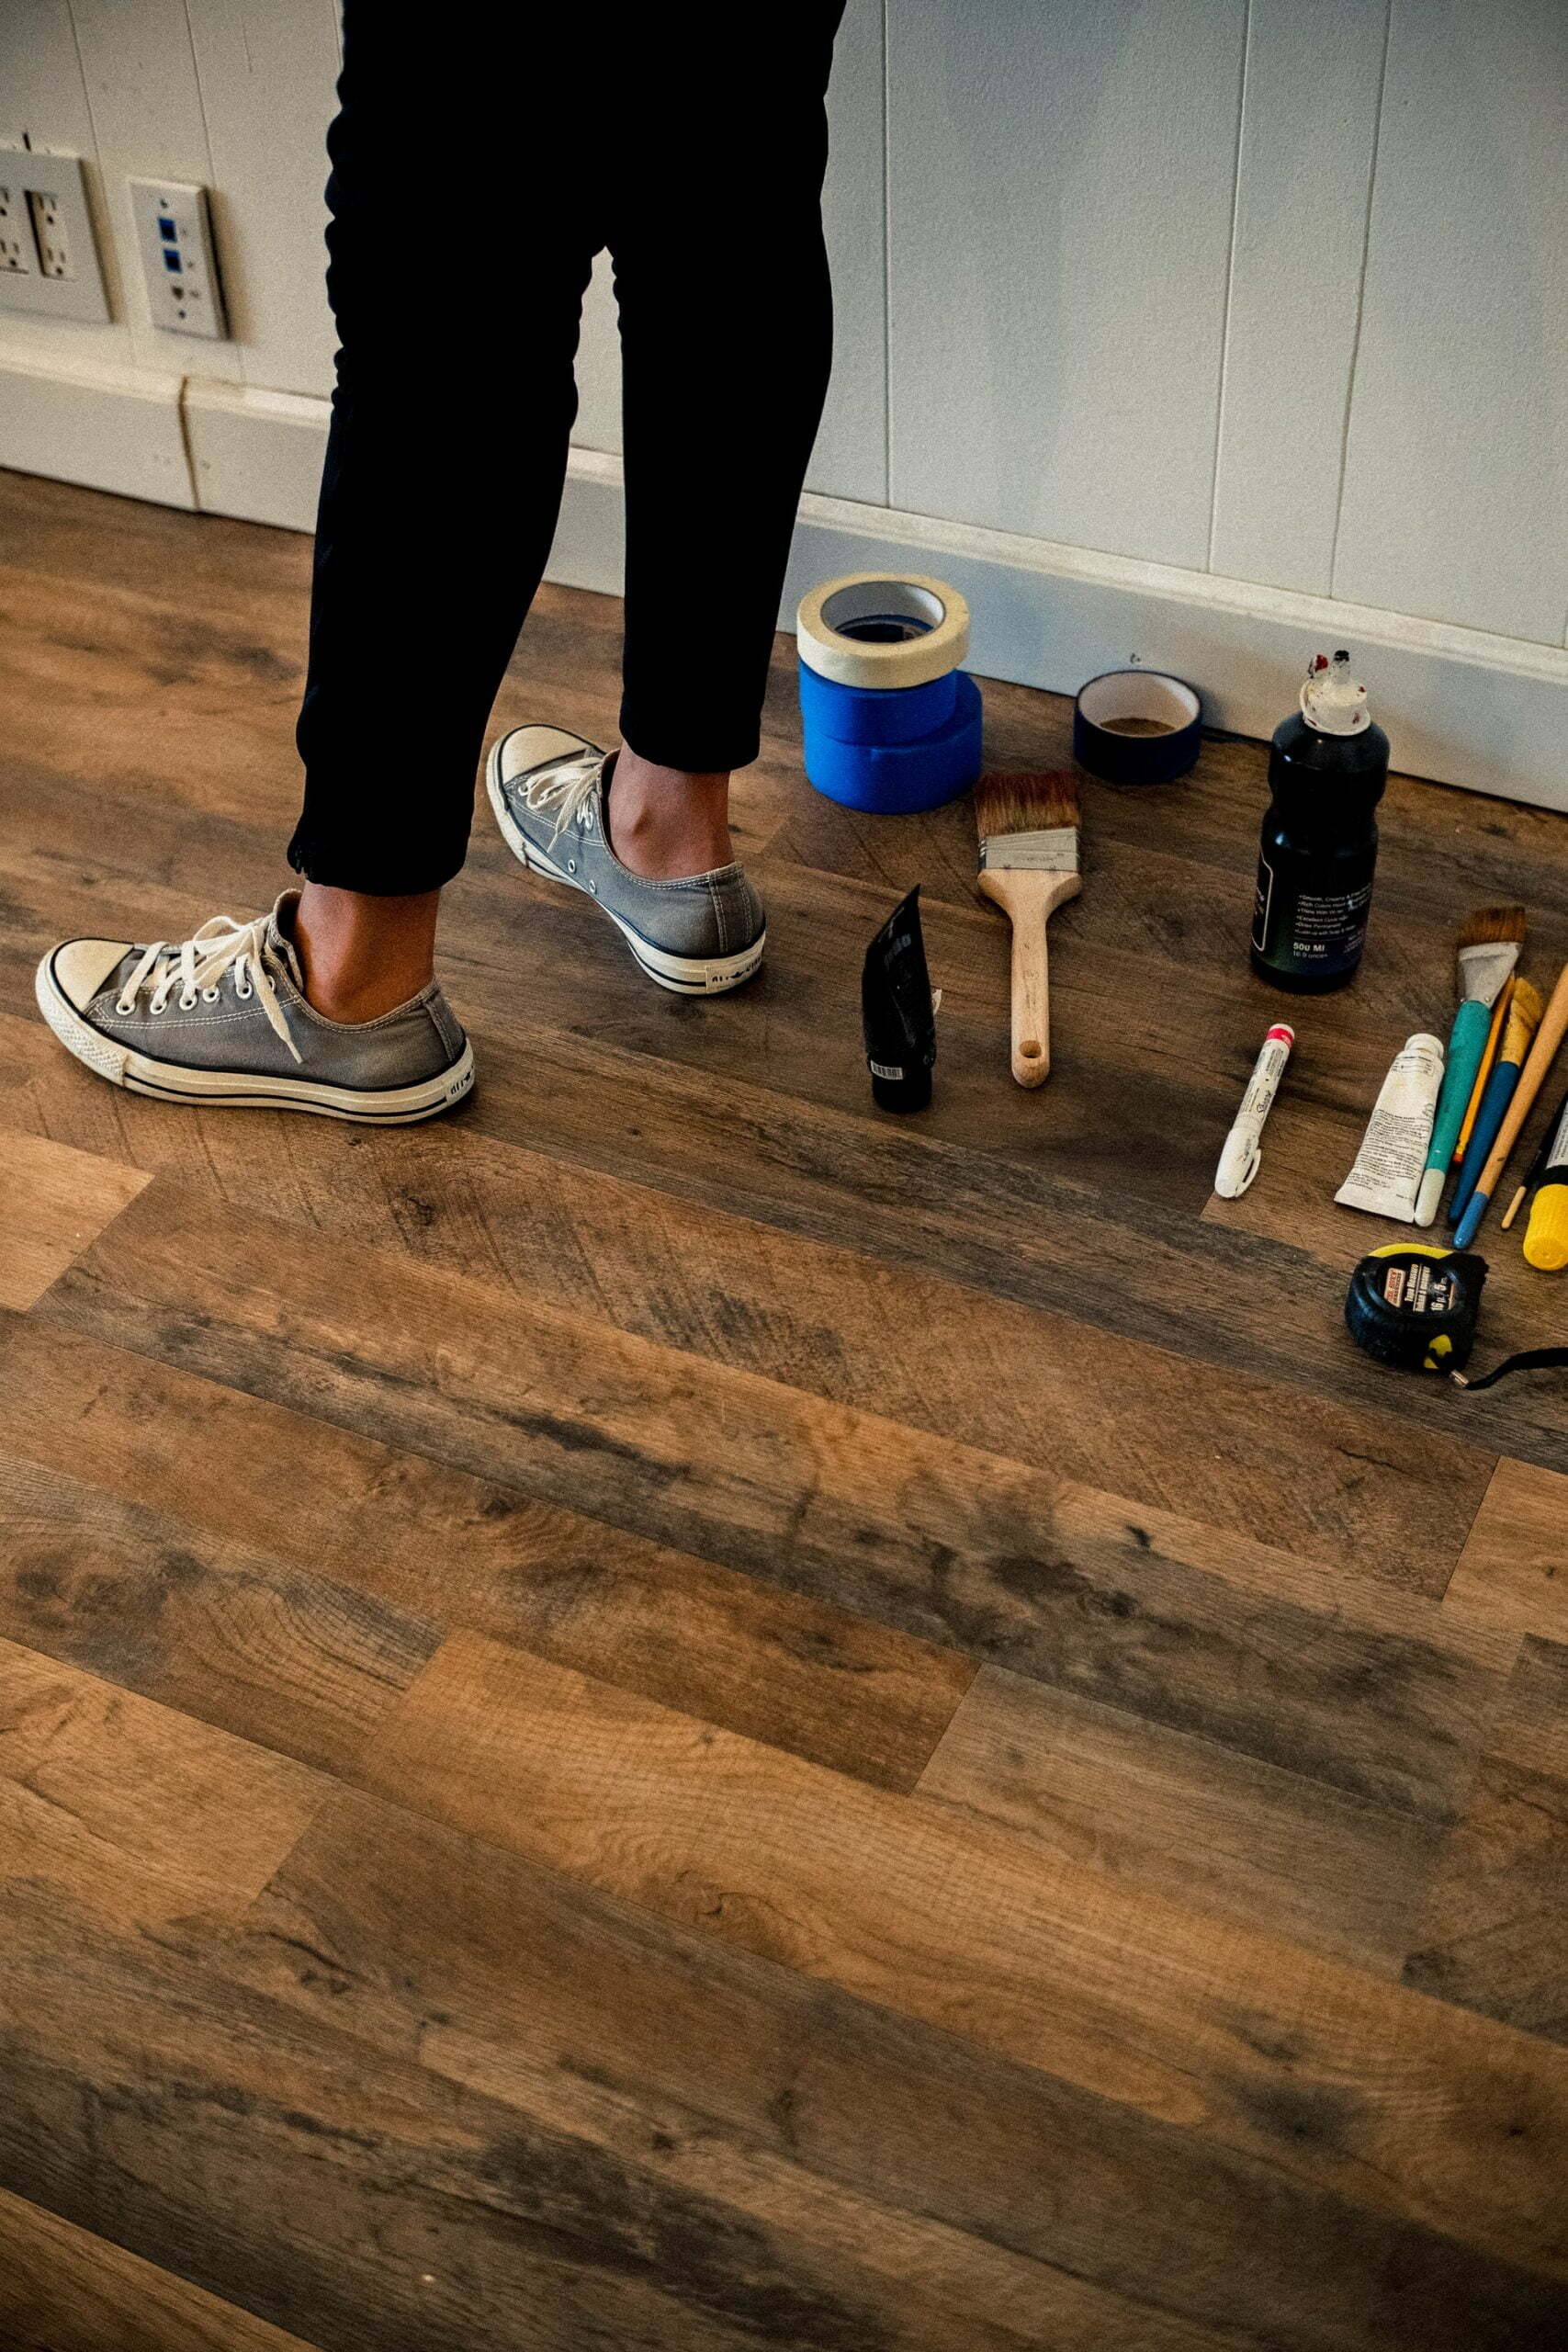 a person standing on a wood floor with tools and a can